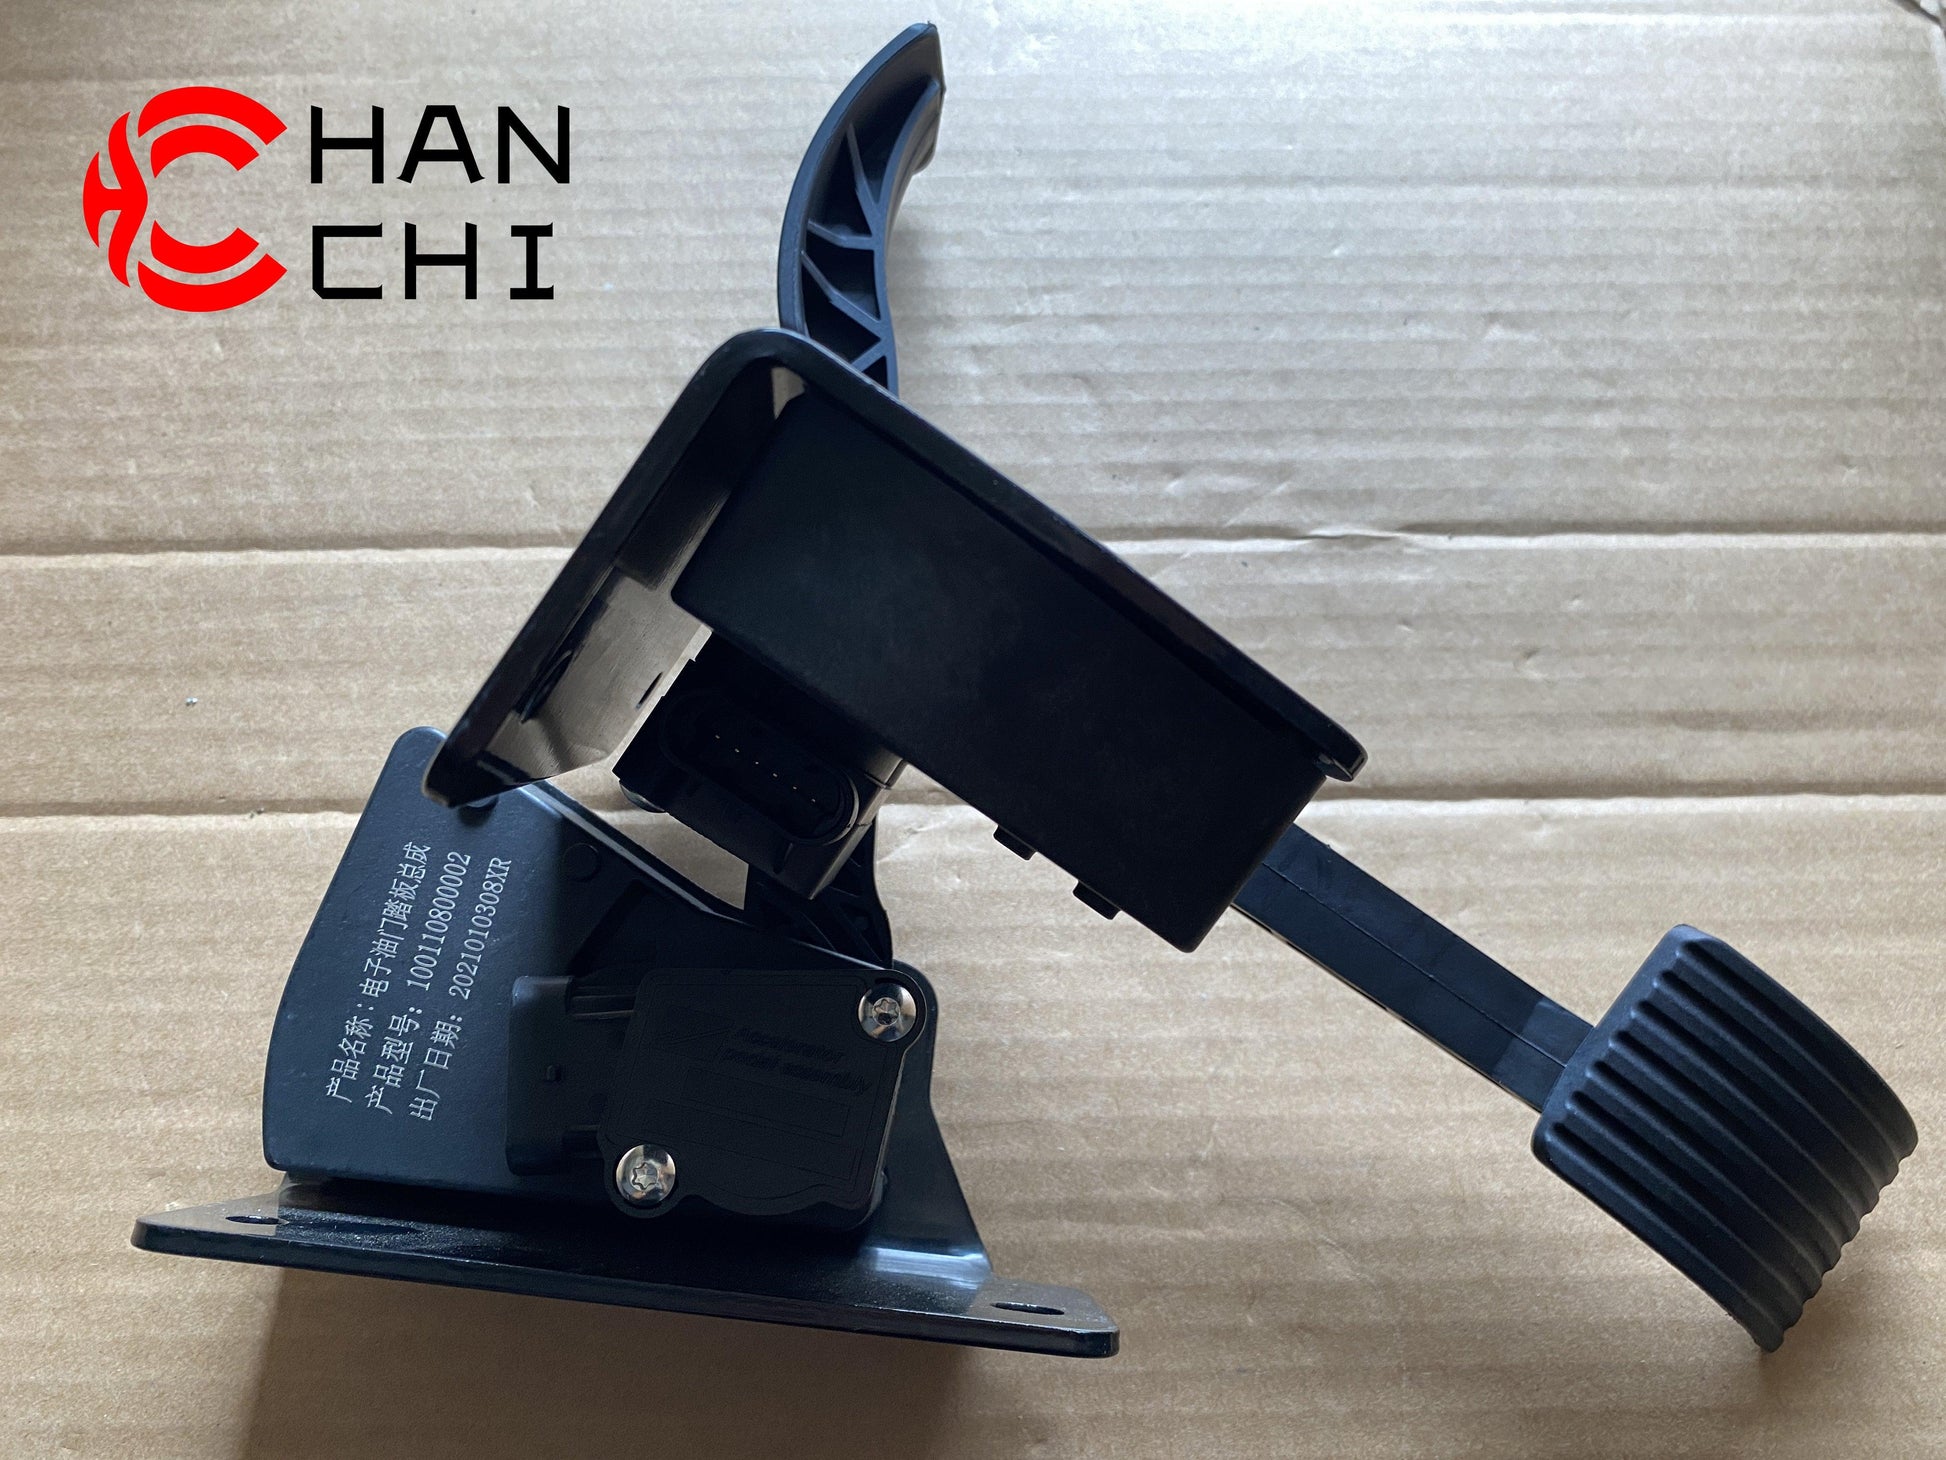 OEM: 100110800002Material: ABS MetalColor: blackOrigin: Made in ChinaWeight: 1000gPacking List: 1* Electronic Accelerator Pedal EFP More ServiceWe can provide OEM Manufacturing serviceWe can Be your one-step solution for Auto PartsWe can provide technical scheme for you Feel Free to Contact Us, We will get back to you as soon as possible.